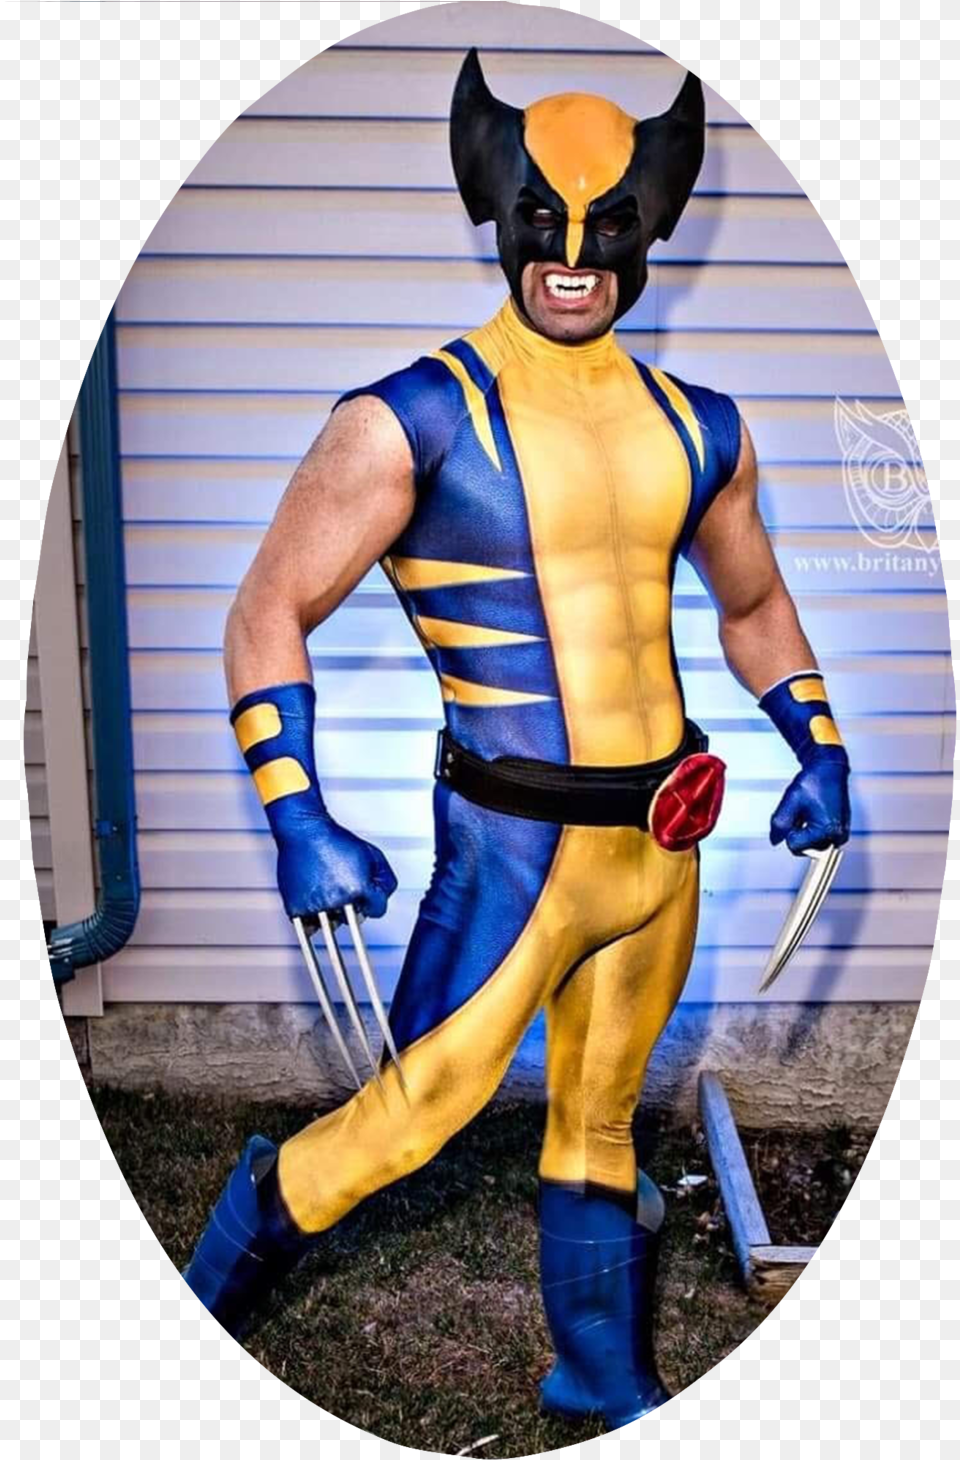 Ppbm Sh Wolverine, Clothing, Costume, Photography, Glove Png